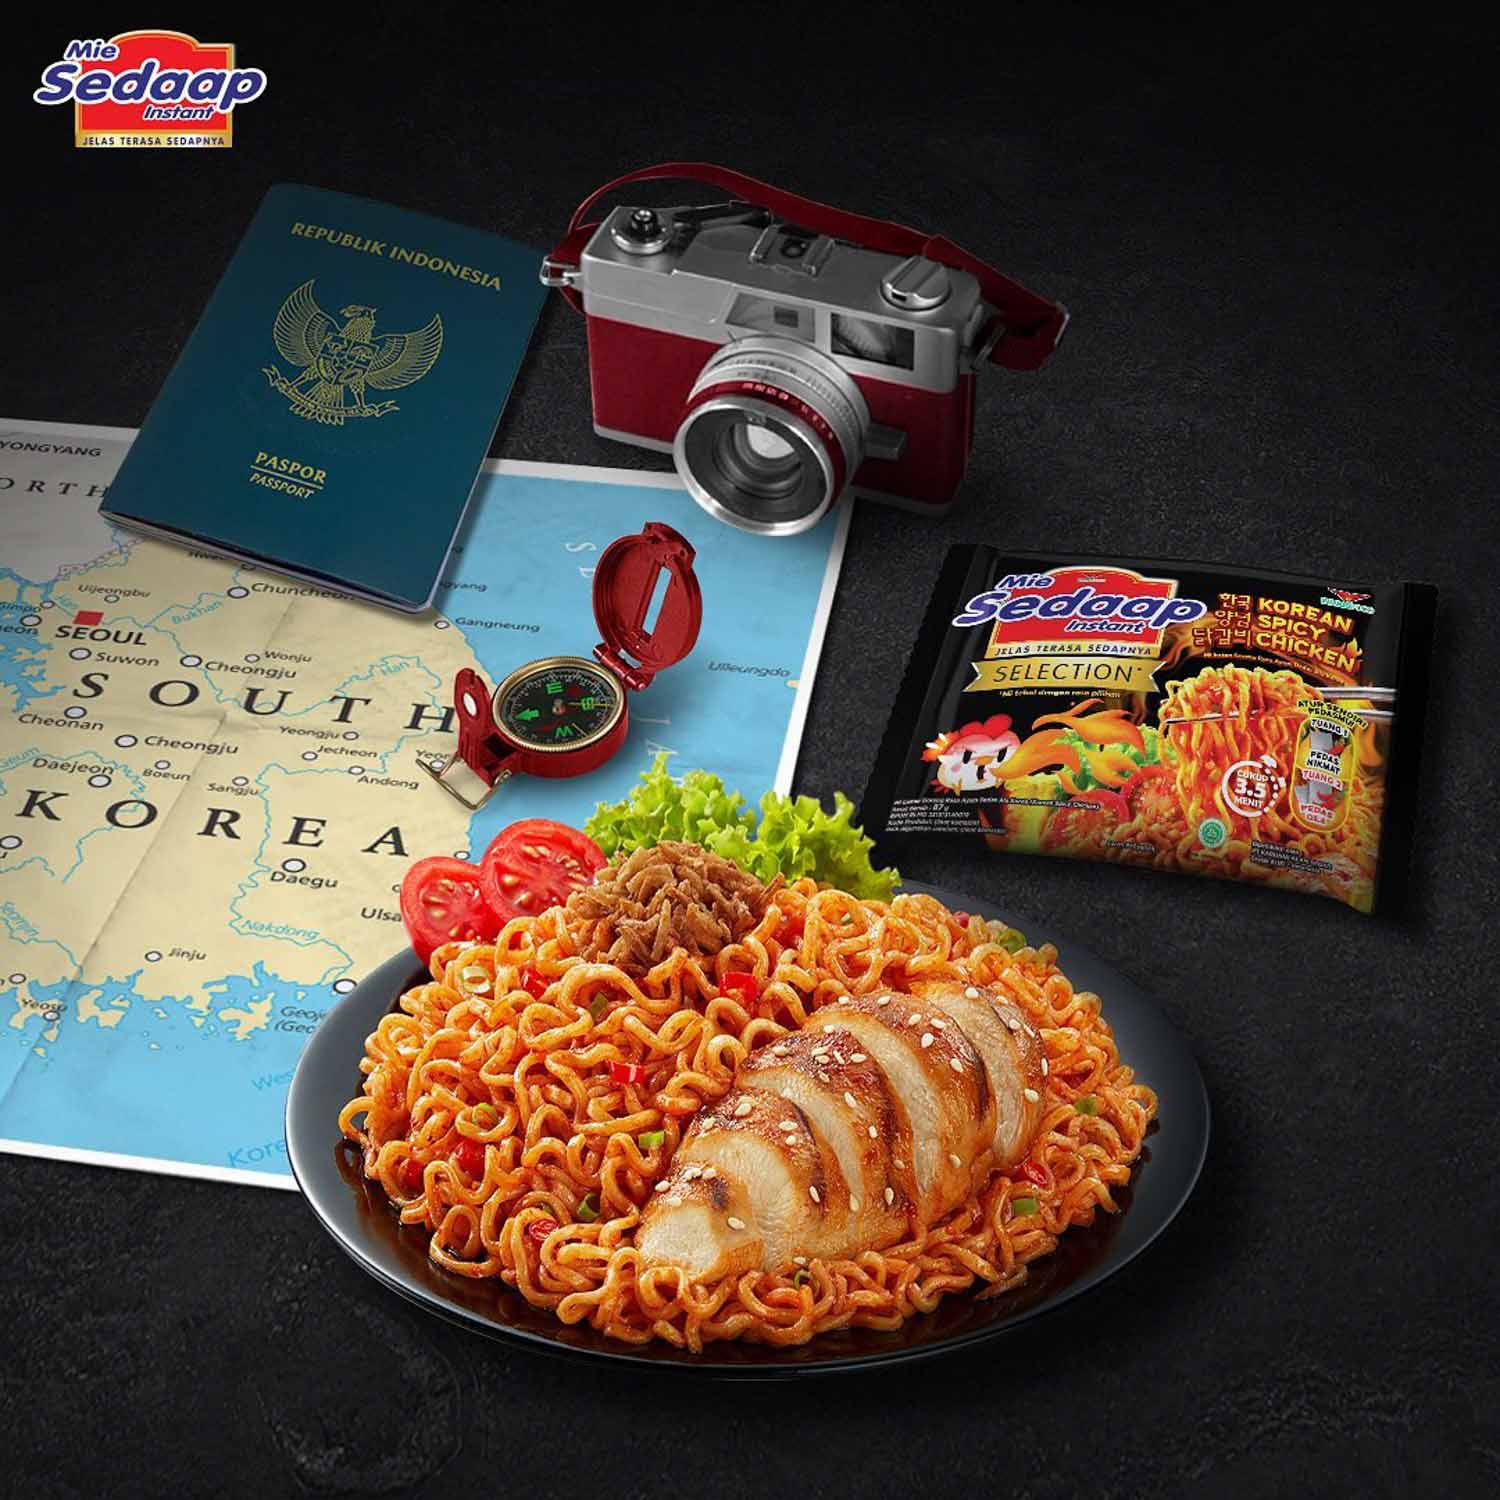 Mie Sedaap Has New Korean Spicy Chicken Flavoured Noodles For Instant Mee Goreng Lovers